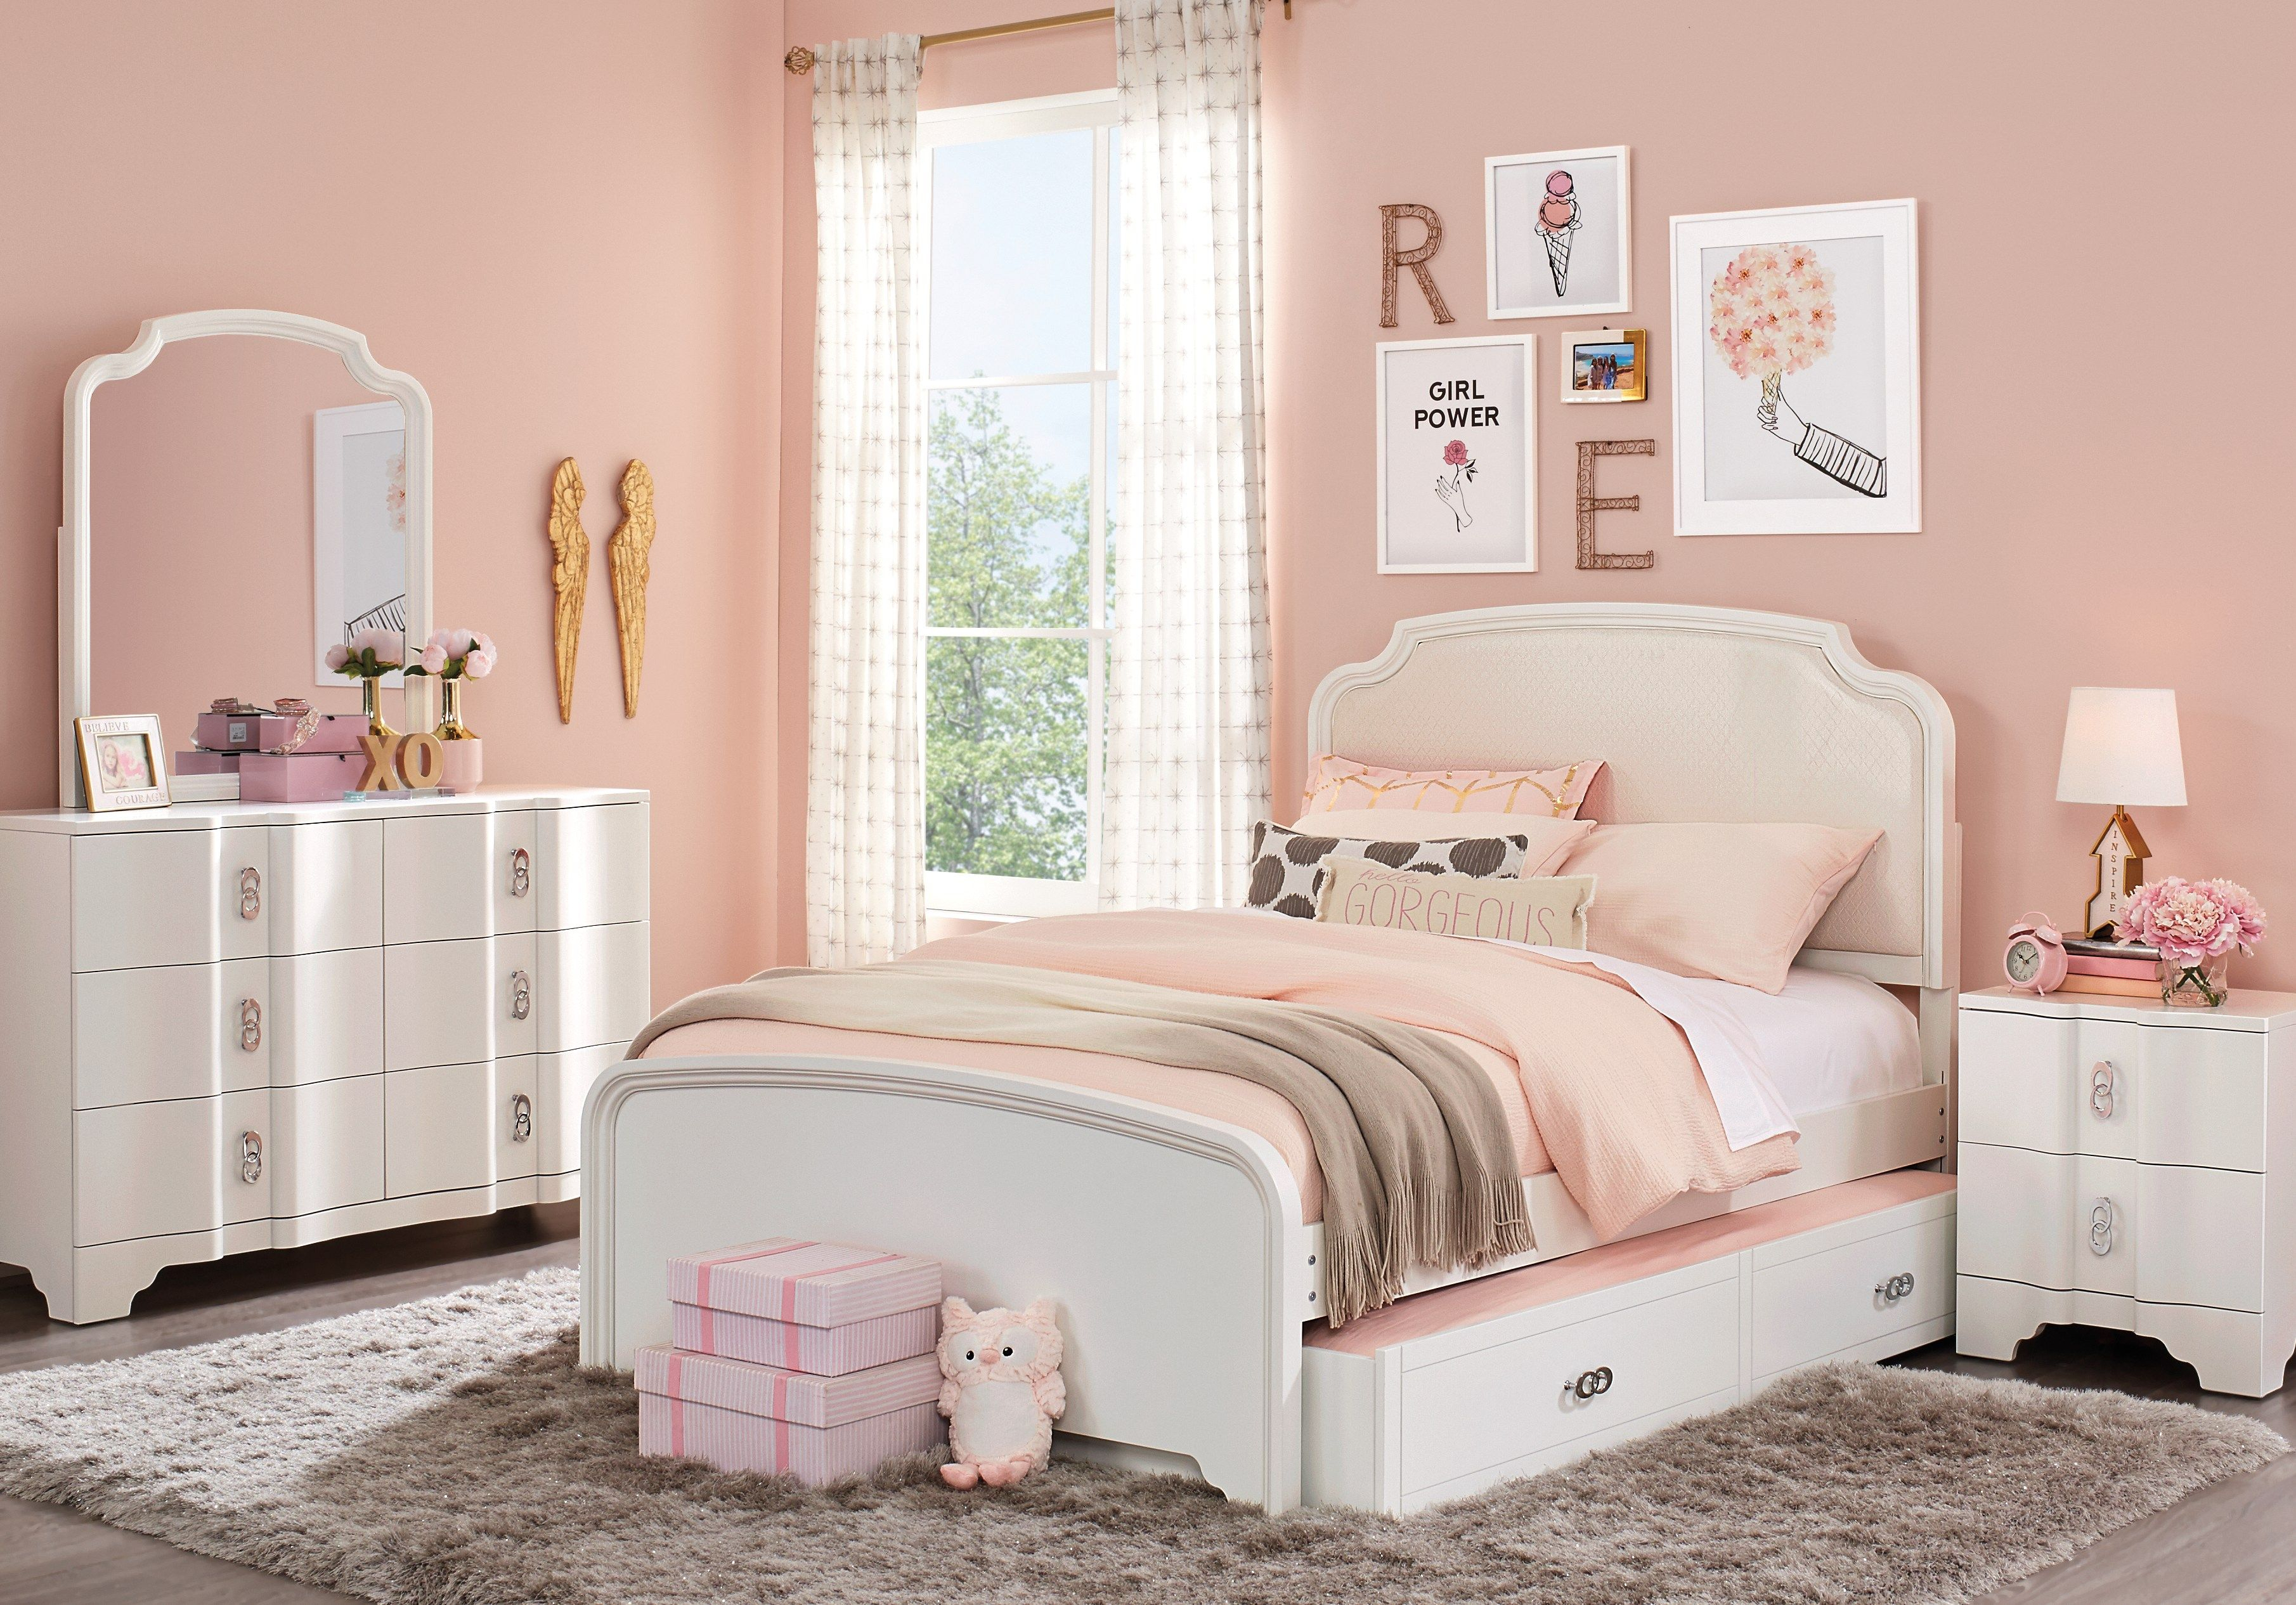 Rylee White 5 Pc Full Upholstered Bedroom Teen Bedroom Sets Colors pertaining to size 3621 X 2531